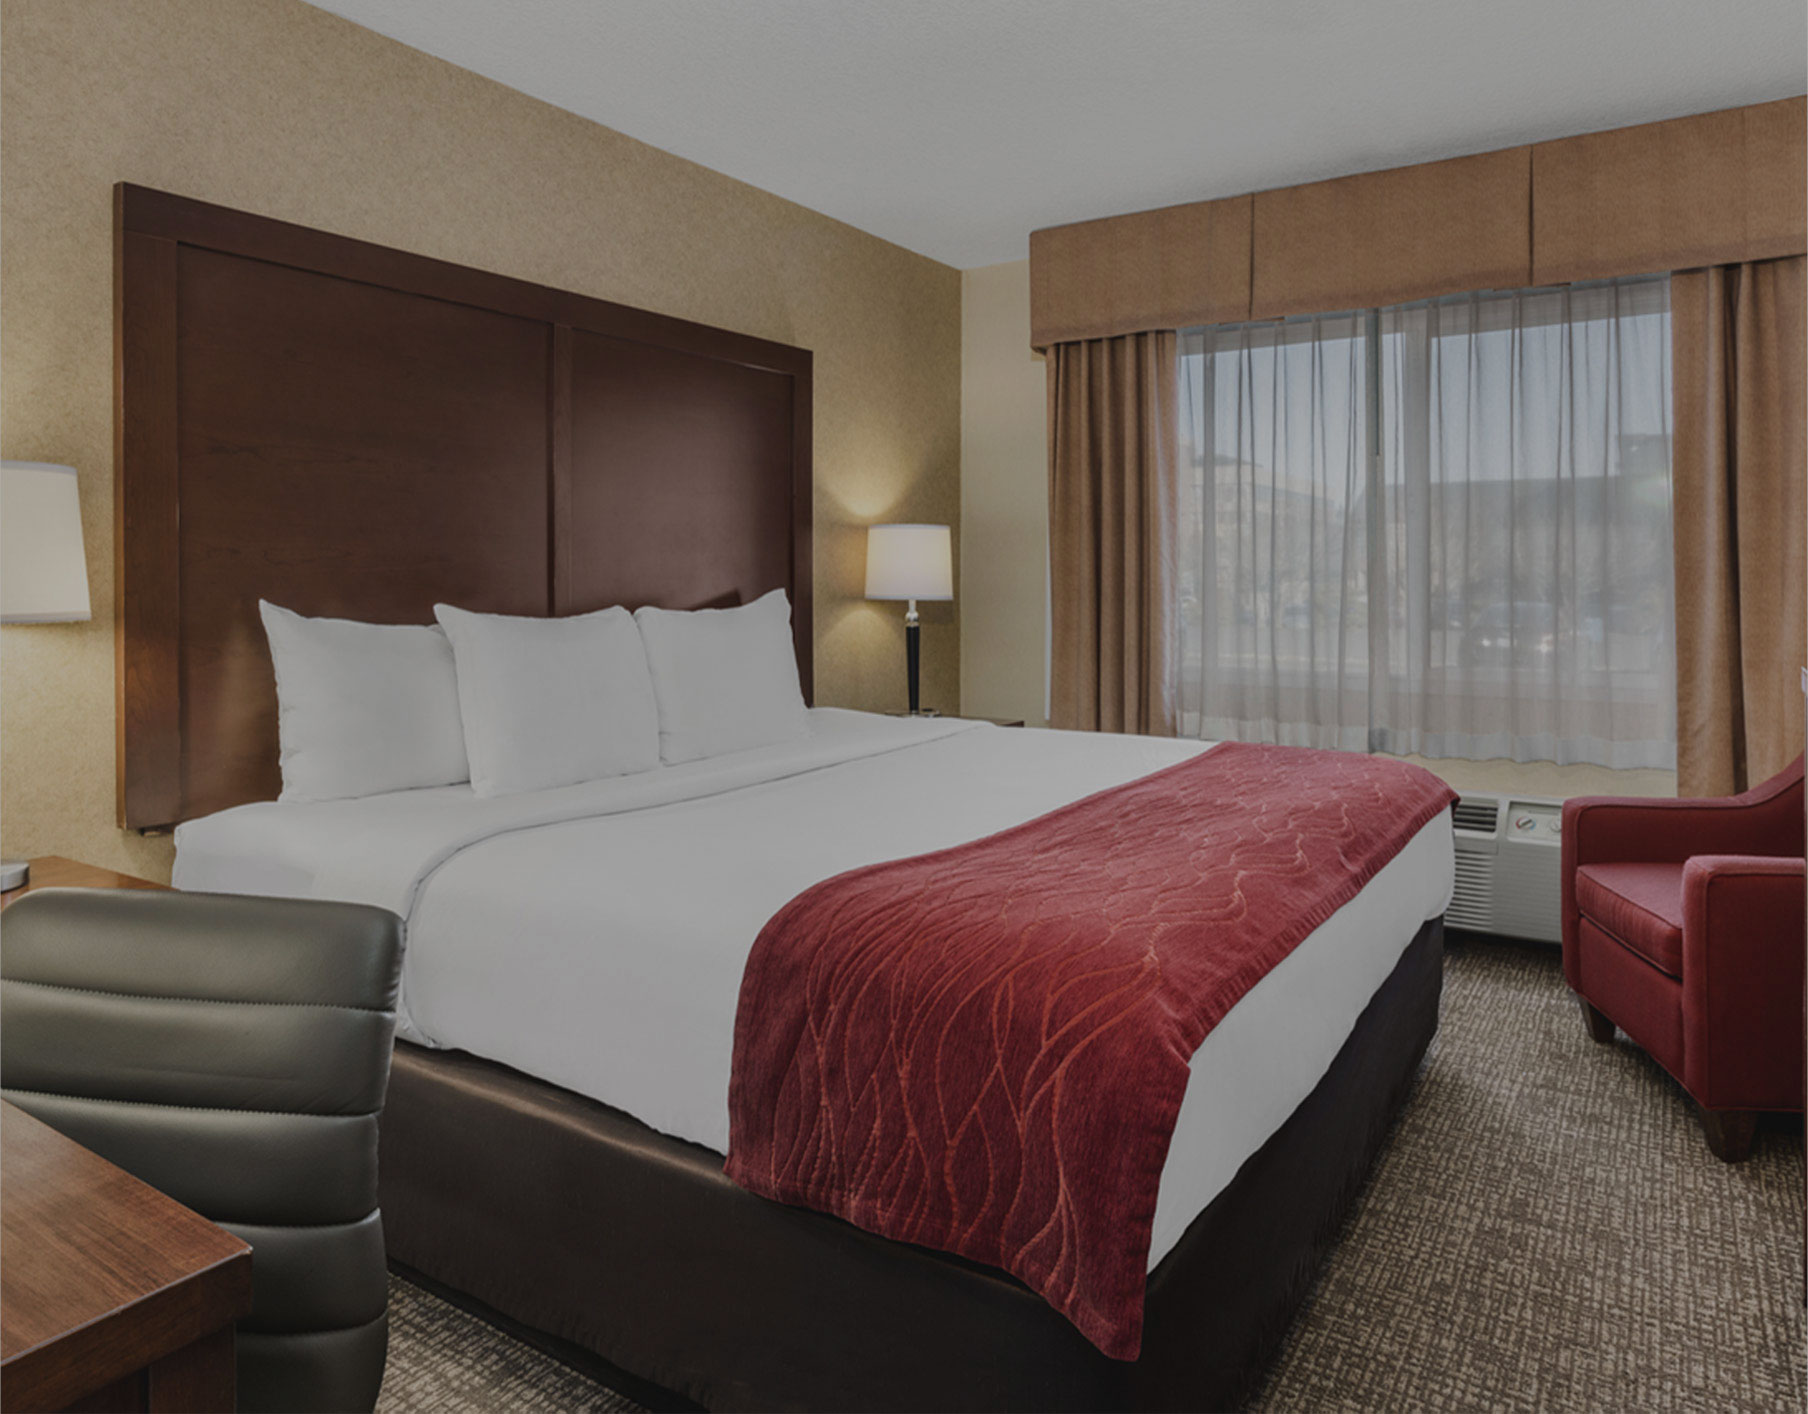 Rooms and Suites at Comfort Inn Vancouver